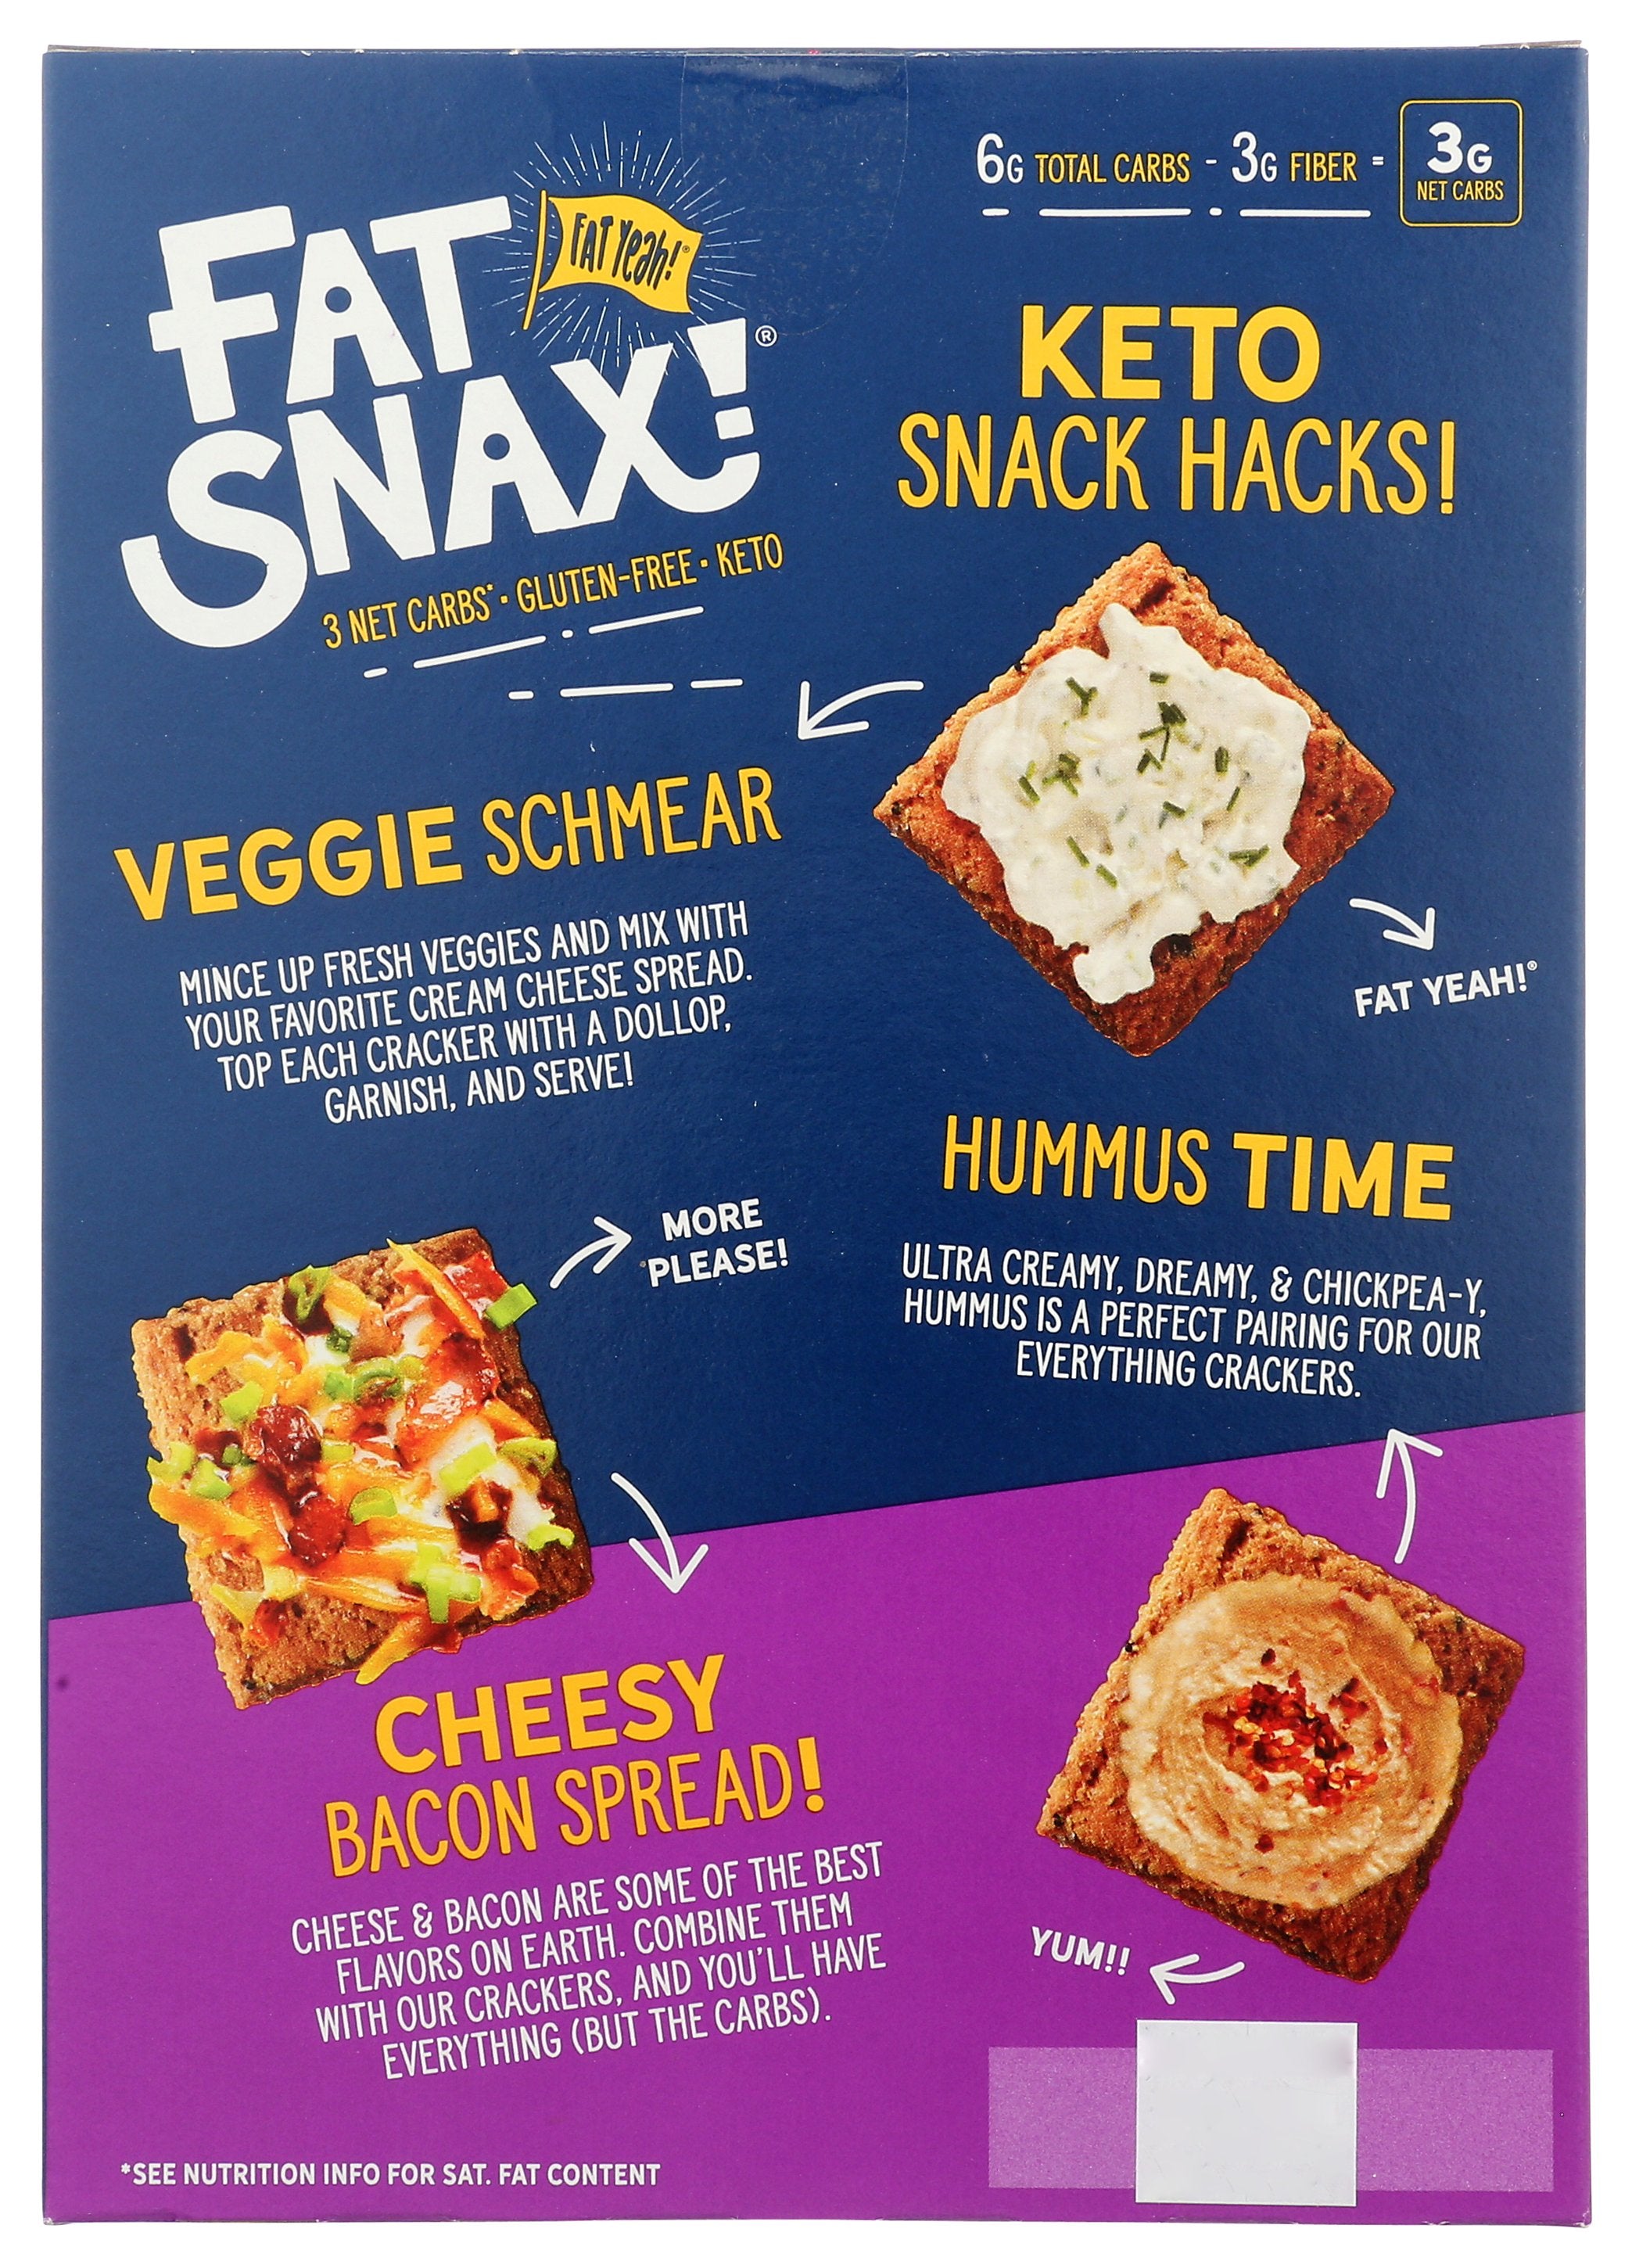 FAT SNAX CRACKERS EVERYTHING - Case of 6